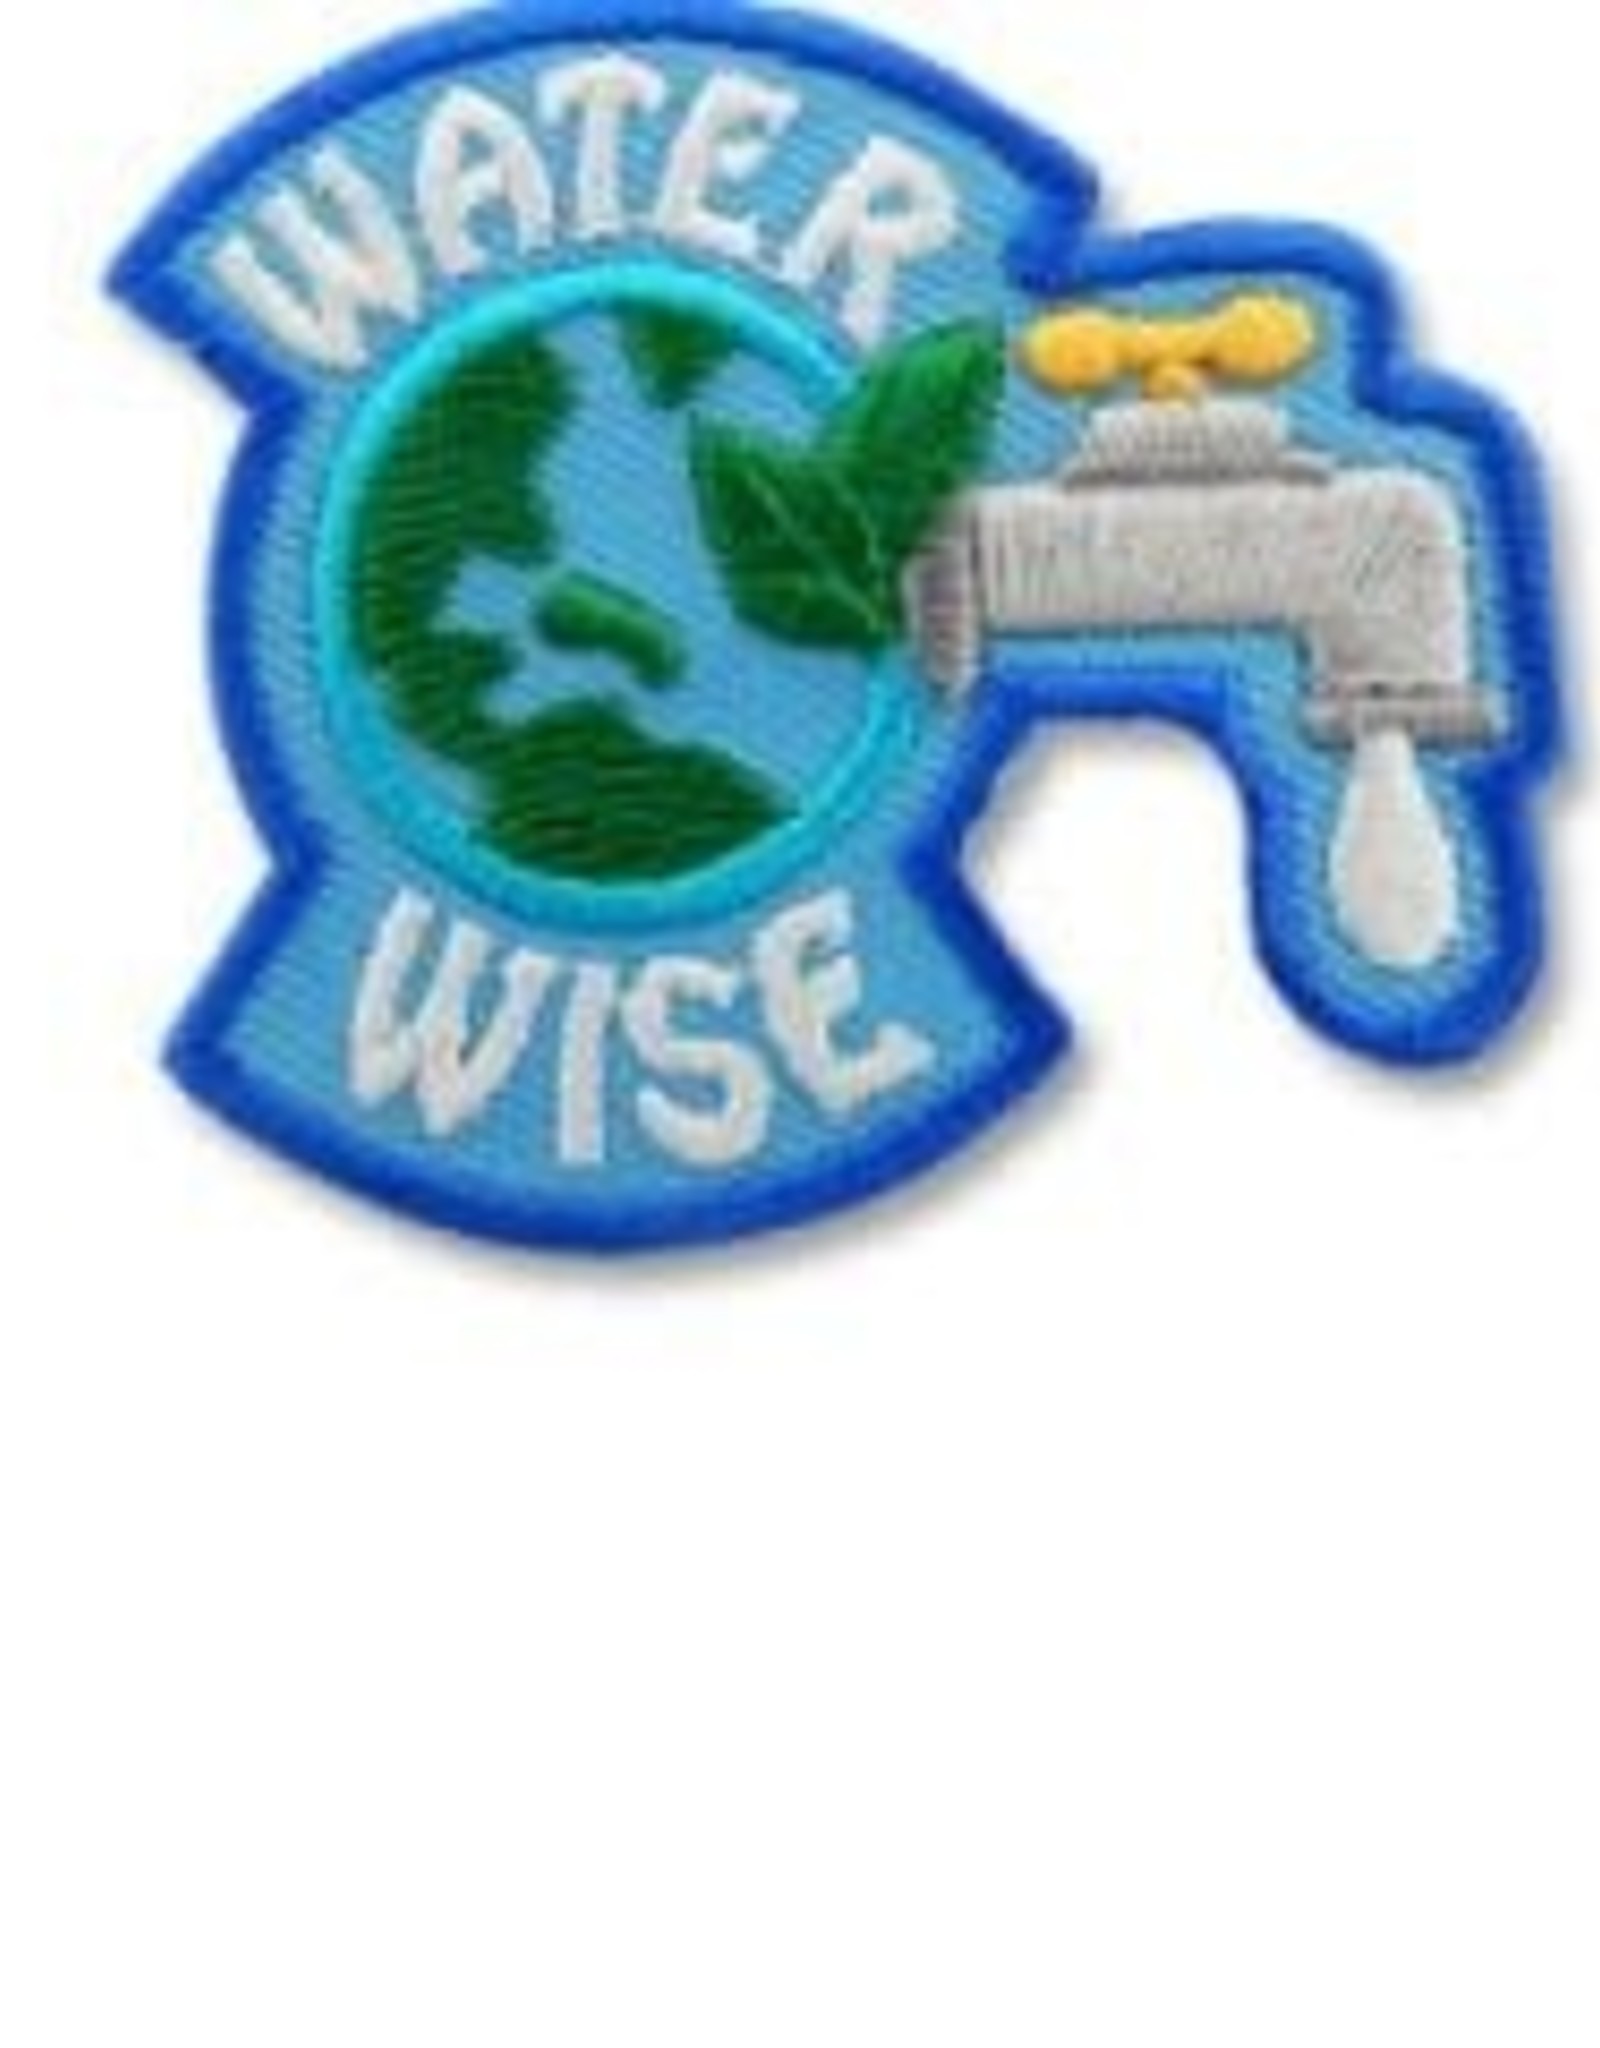 snappylogos Water Wise Globe Faucet Fun Patch (6023)